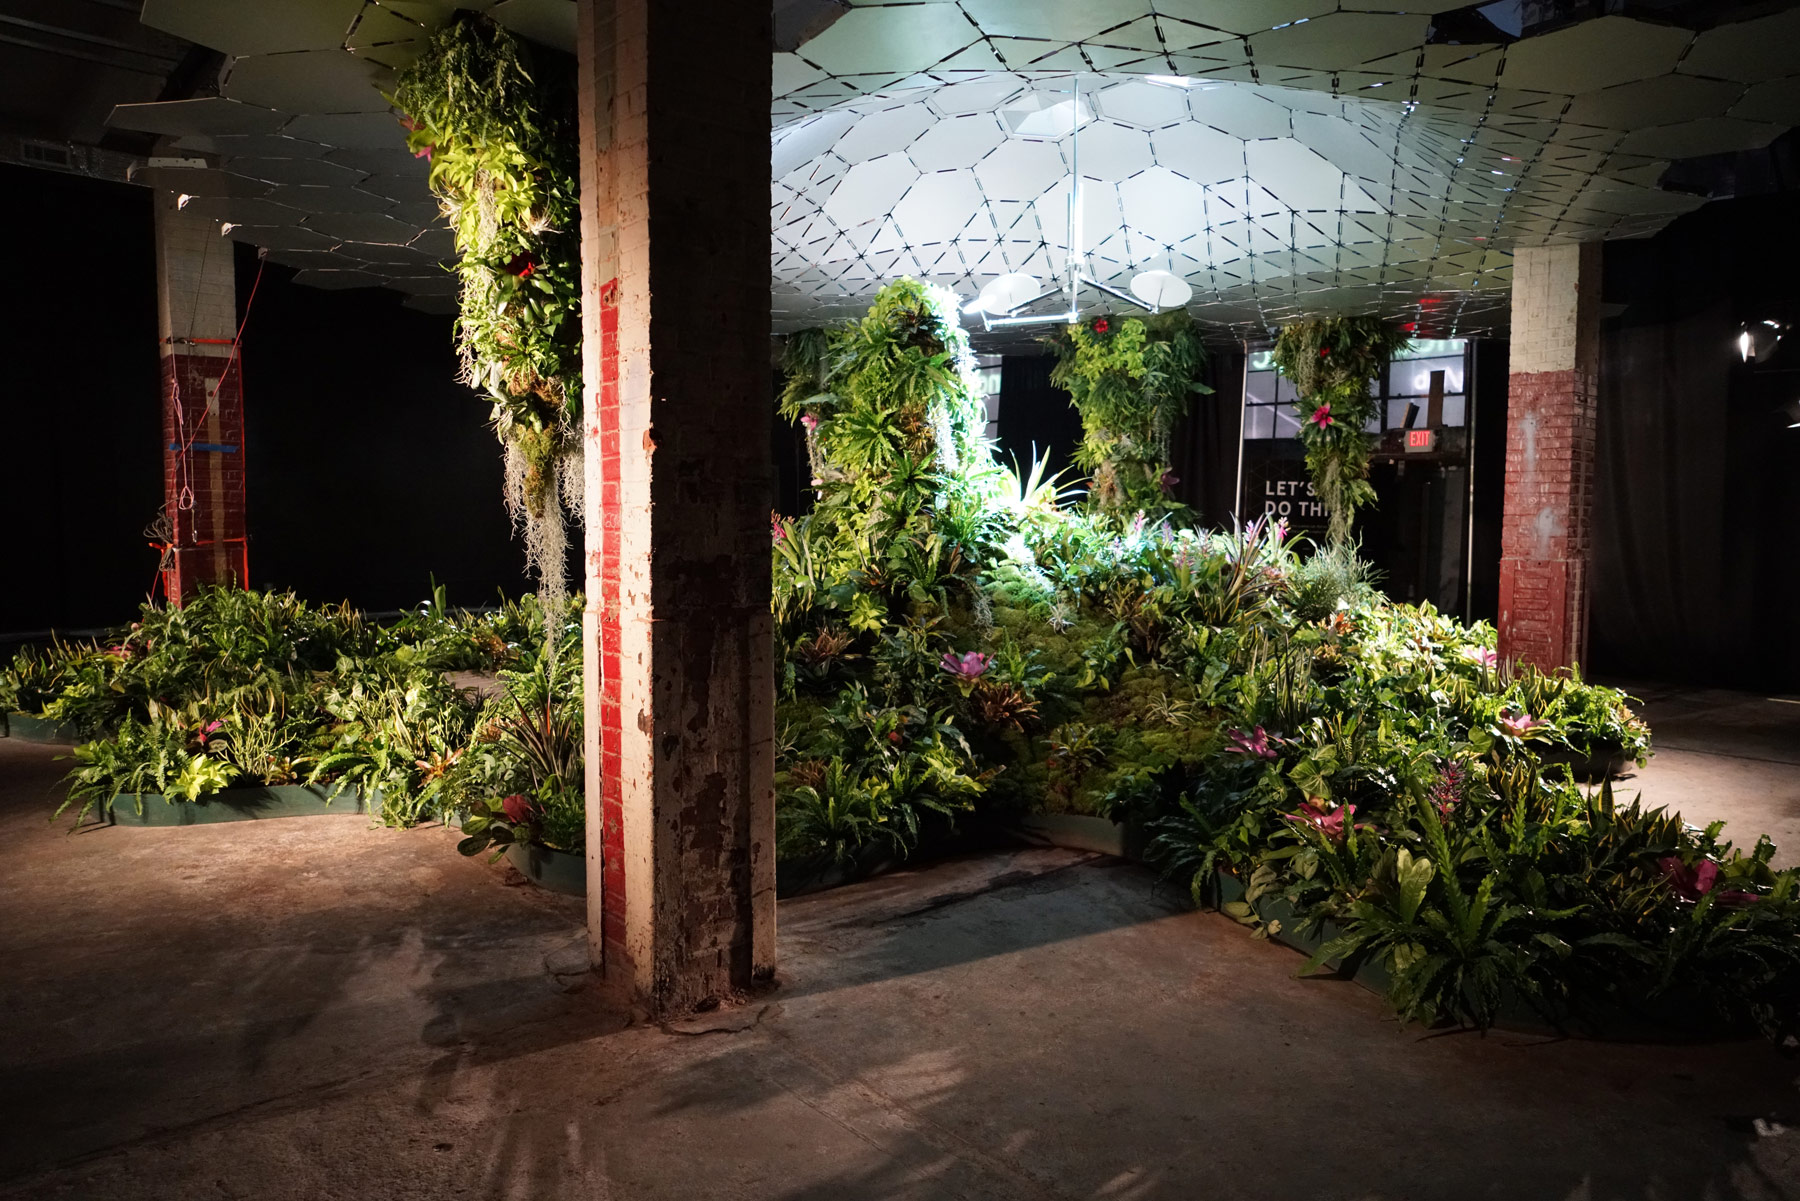 An innovative system of parabolic collectors, mirrors, and relay lenses will reflect natural light down into the underground “park” at the Lowline Lab in New York City. (Courtesy Lowline)